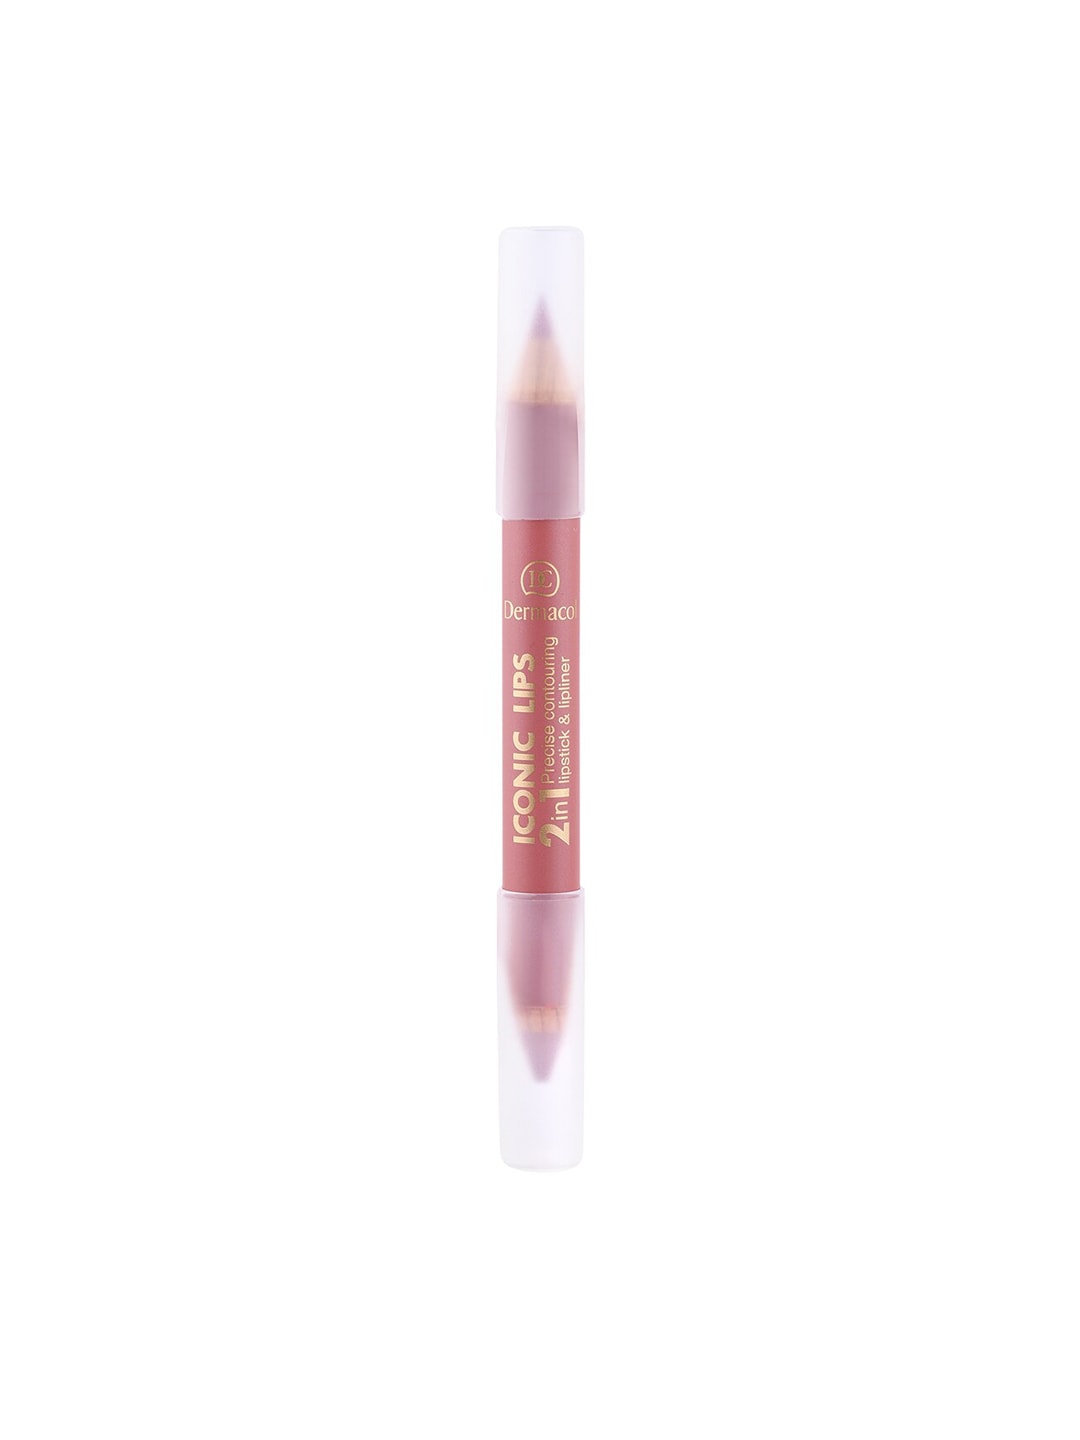 Dermacol Nude-Coloured Iconic Lips 2 in 1 Lipstick & Lipliner 3068 10 g Price in India